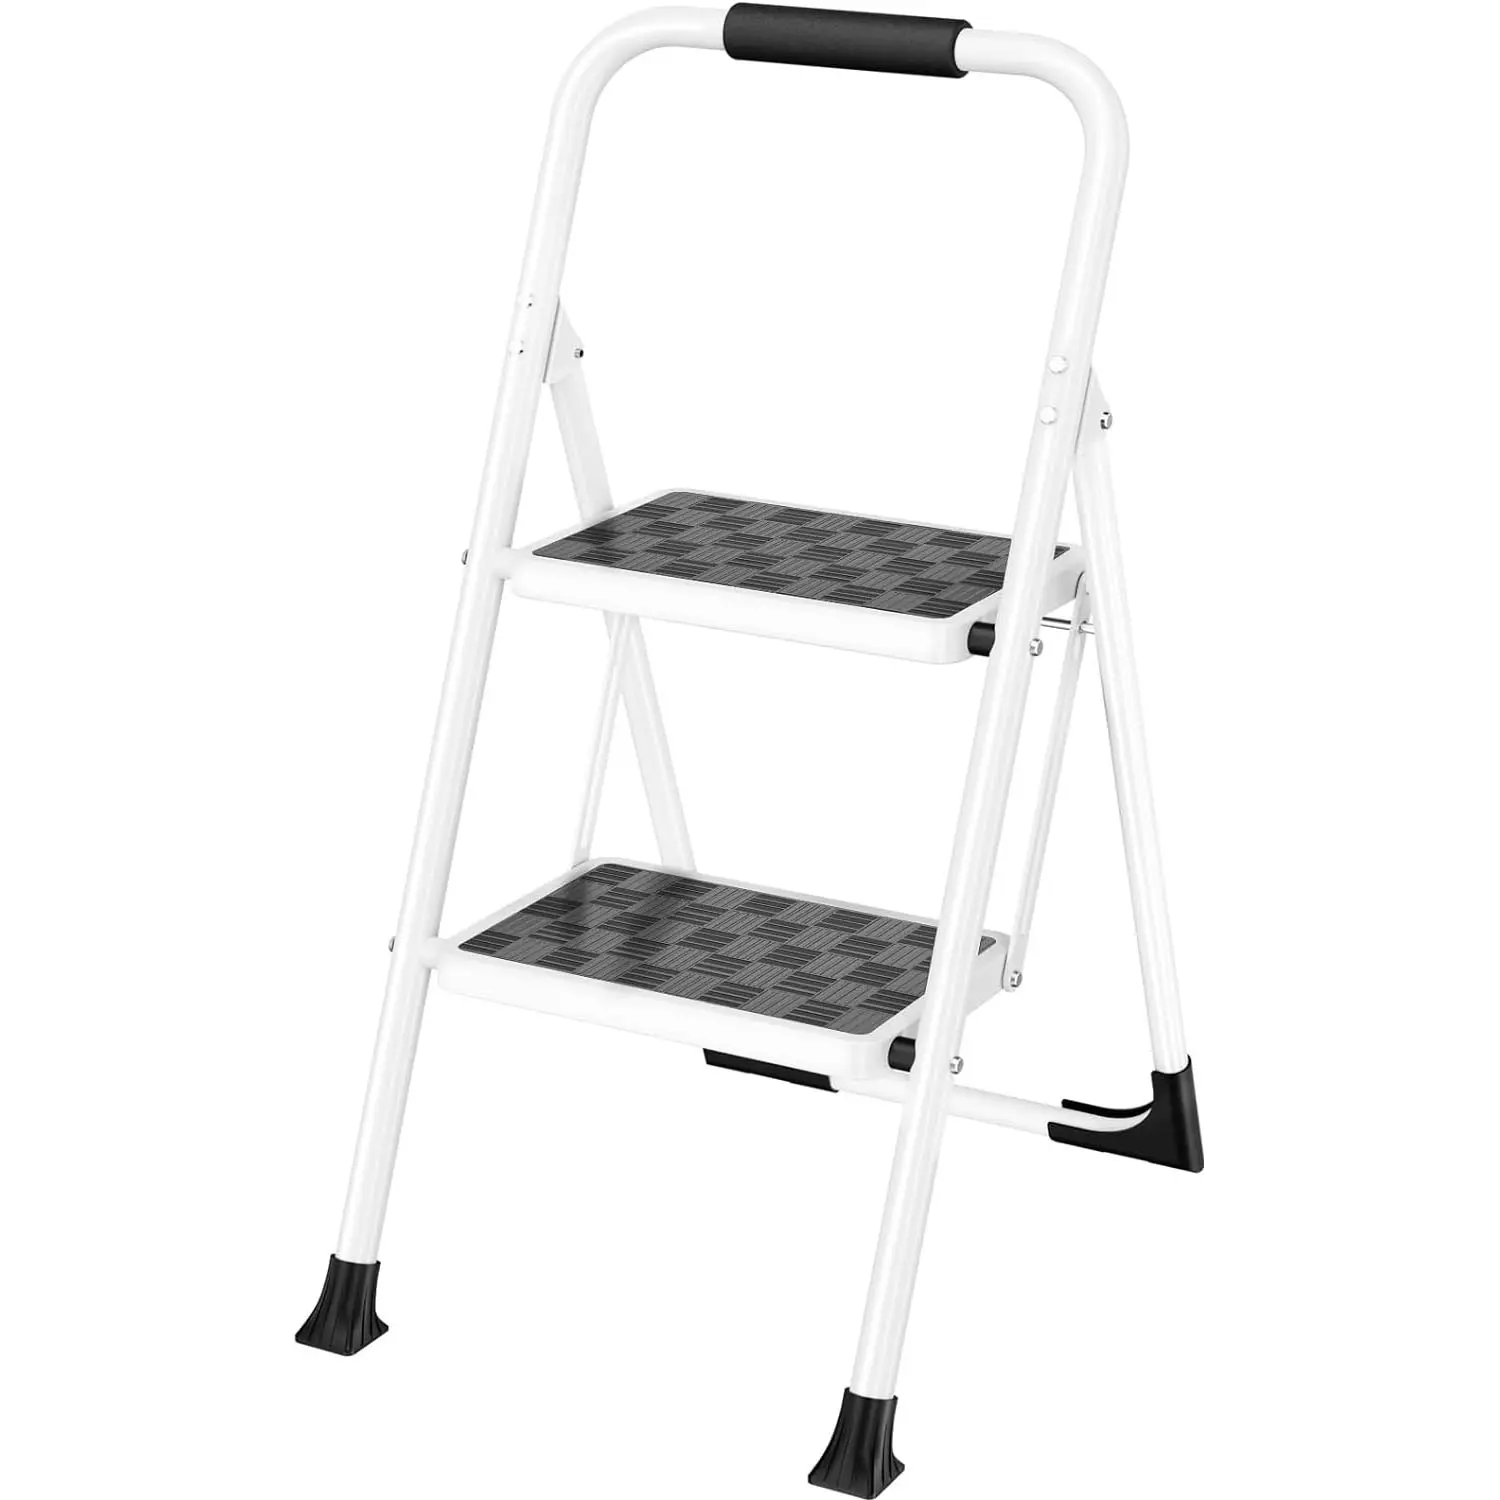 Hot Selling Folding 2 Step Ladder Anti-Slip Sturdy Household Portable Step Stool Foldable Ladders with Cushioned Handle